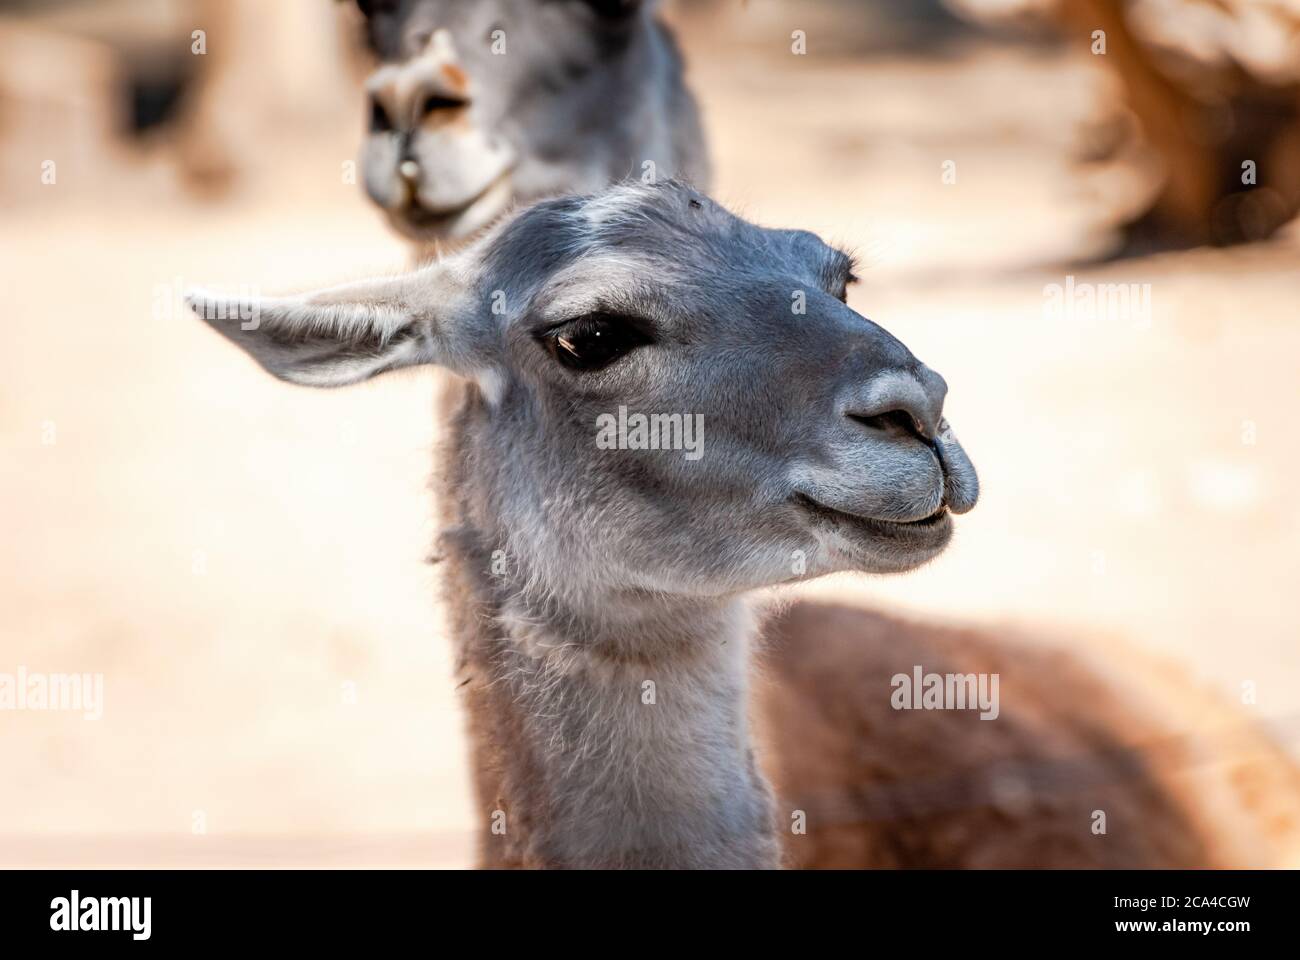 The guanaco (Lama guanicoe) is a camelid native to South America, closely related to the llama. Its name comes from the Quechua word huanaco. Stock Photo